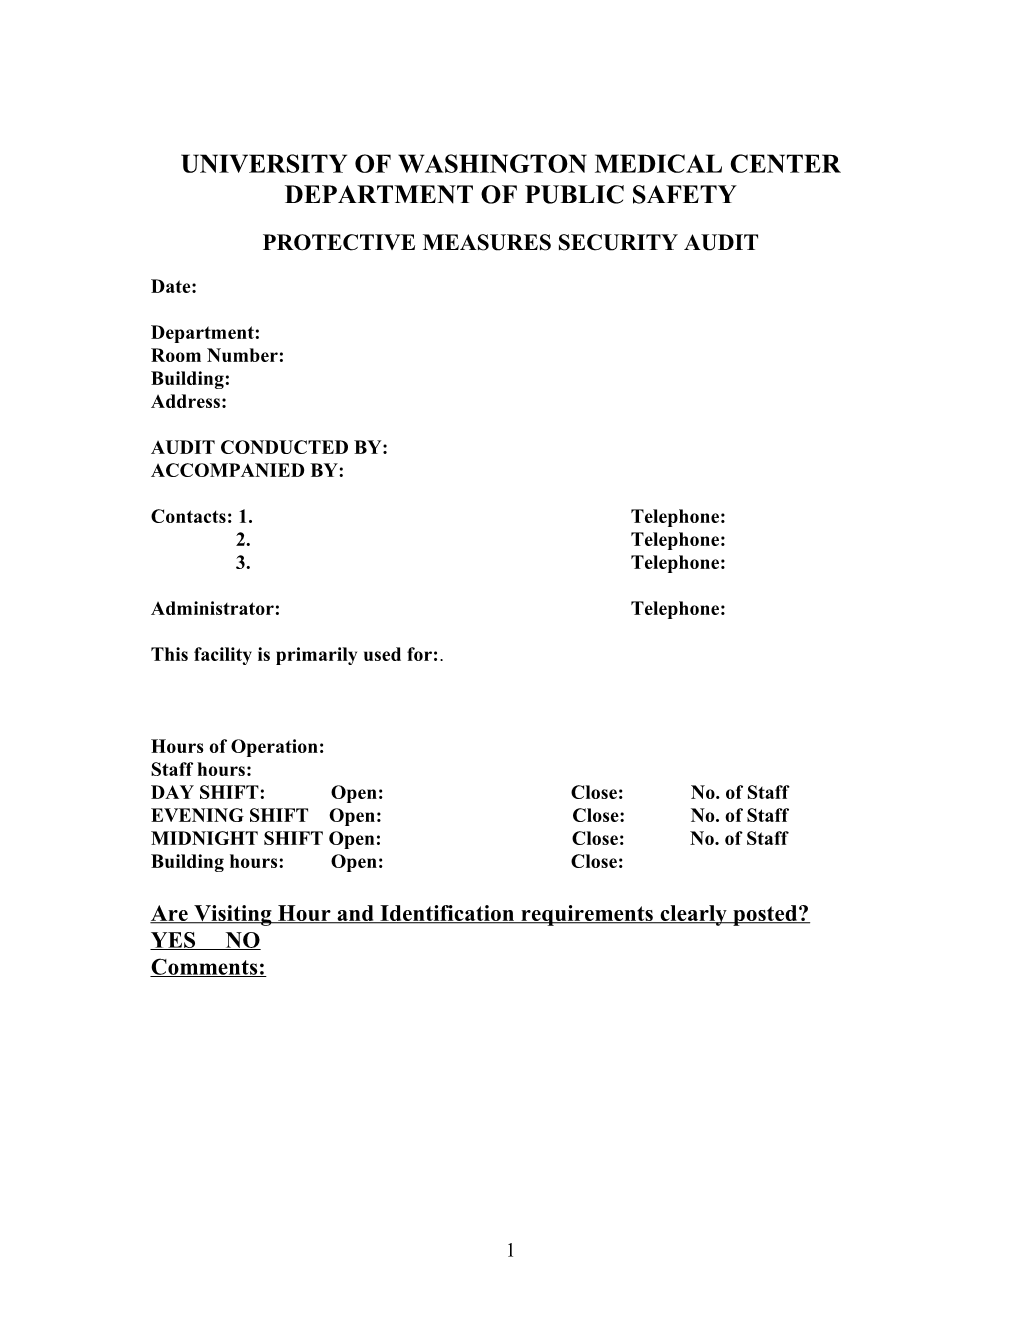 Security Audit, Uwmc Department of Public Safety